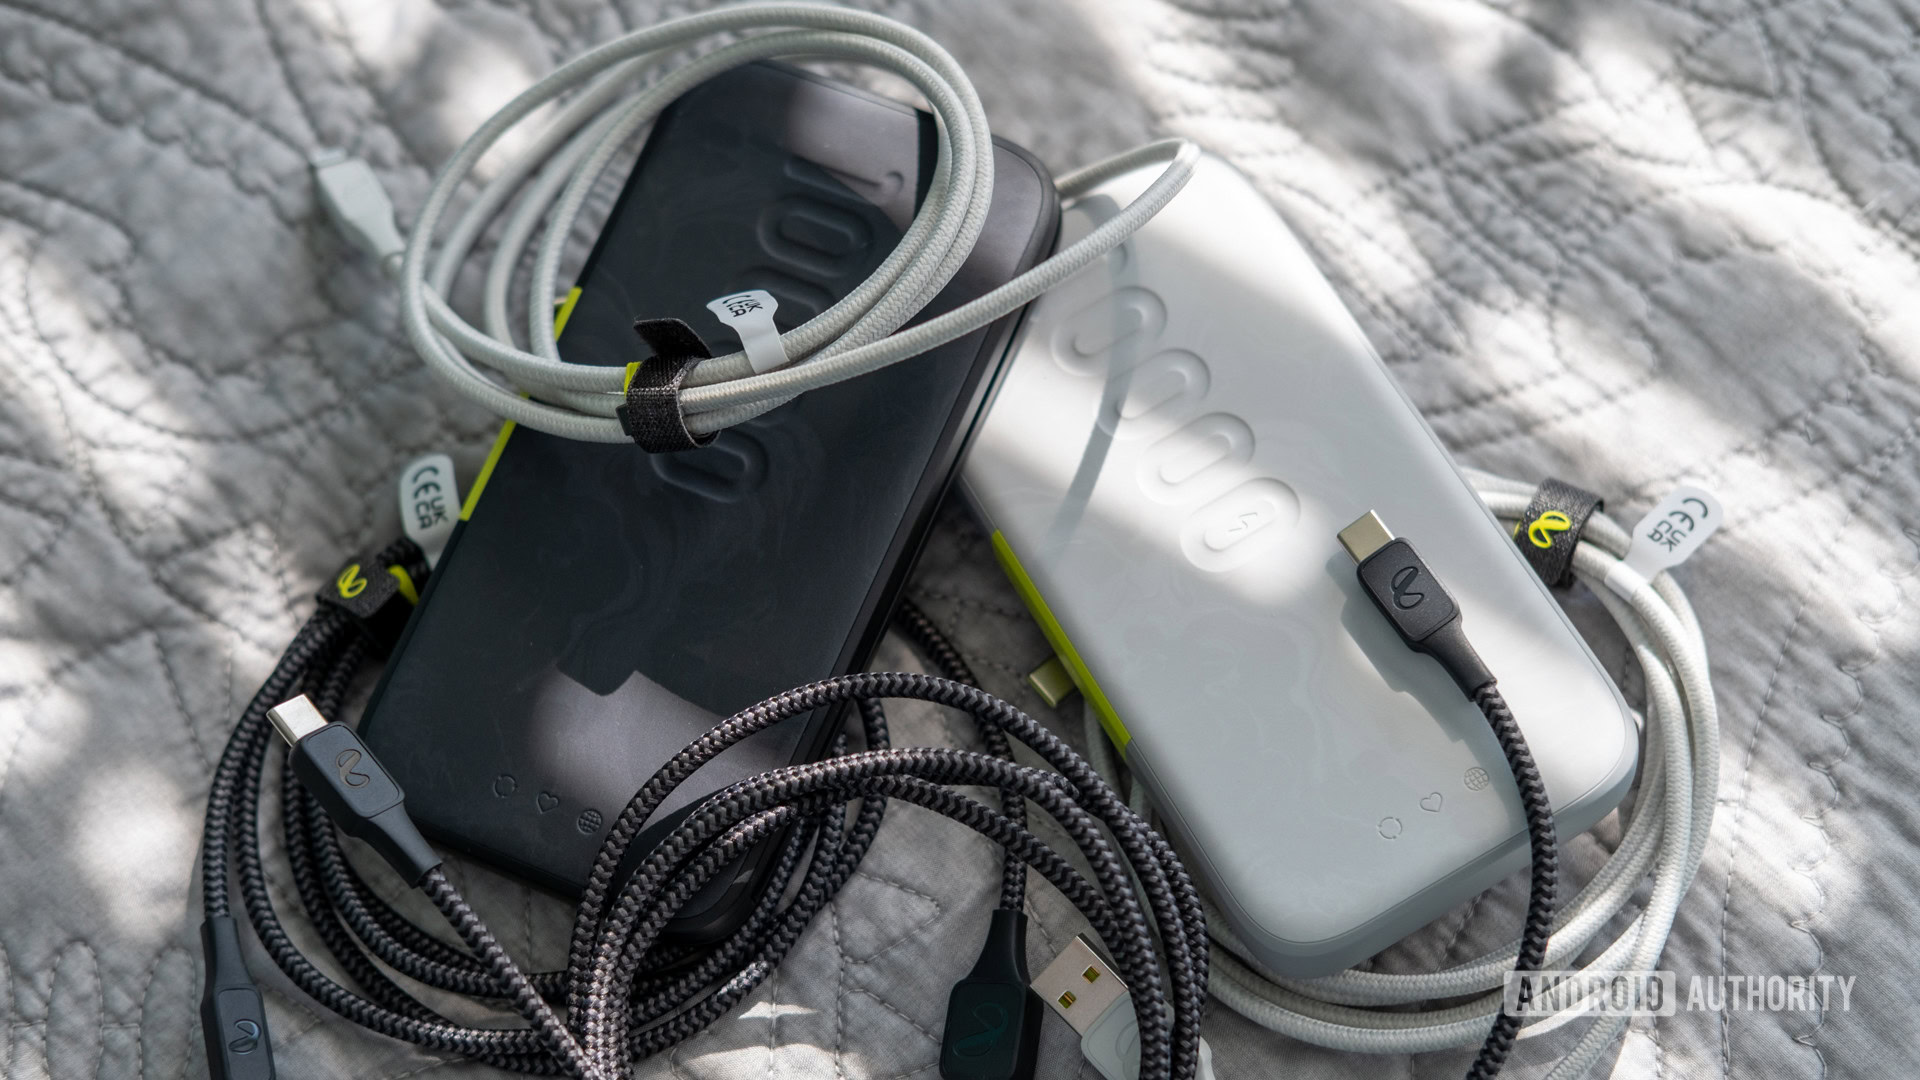 InfinityLab InstantGo power banks surrounded by charging cables